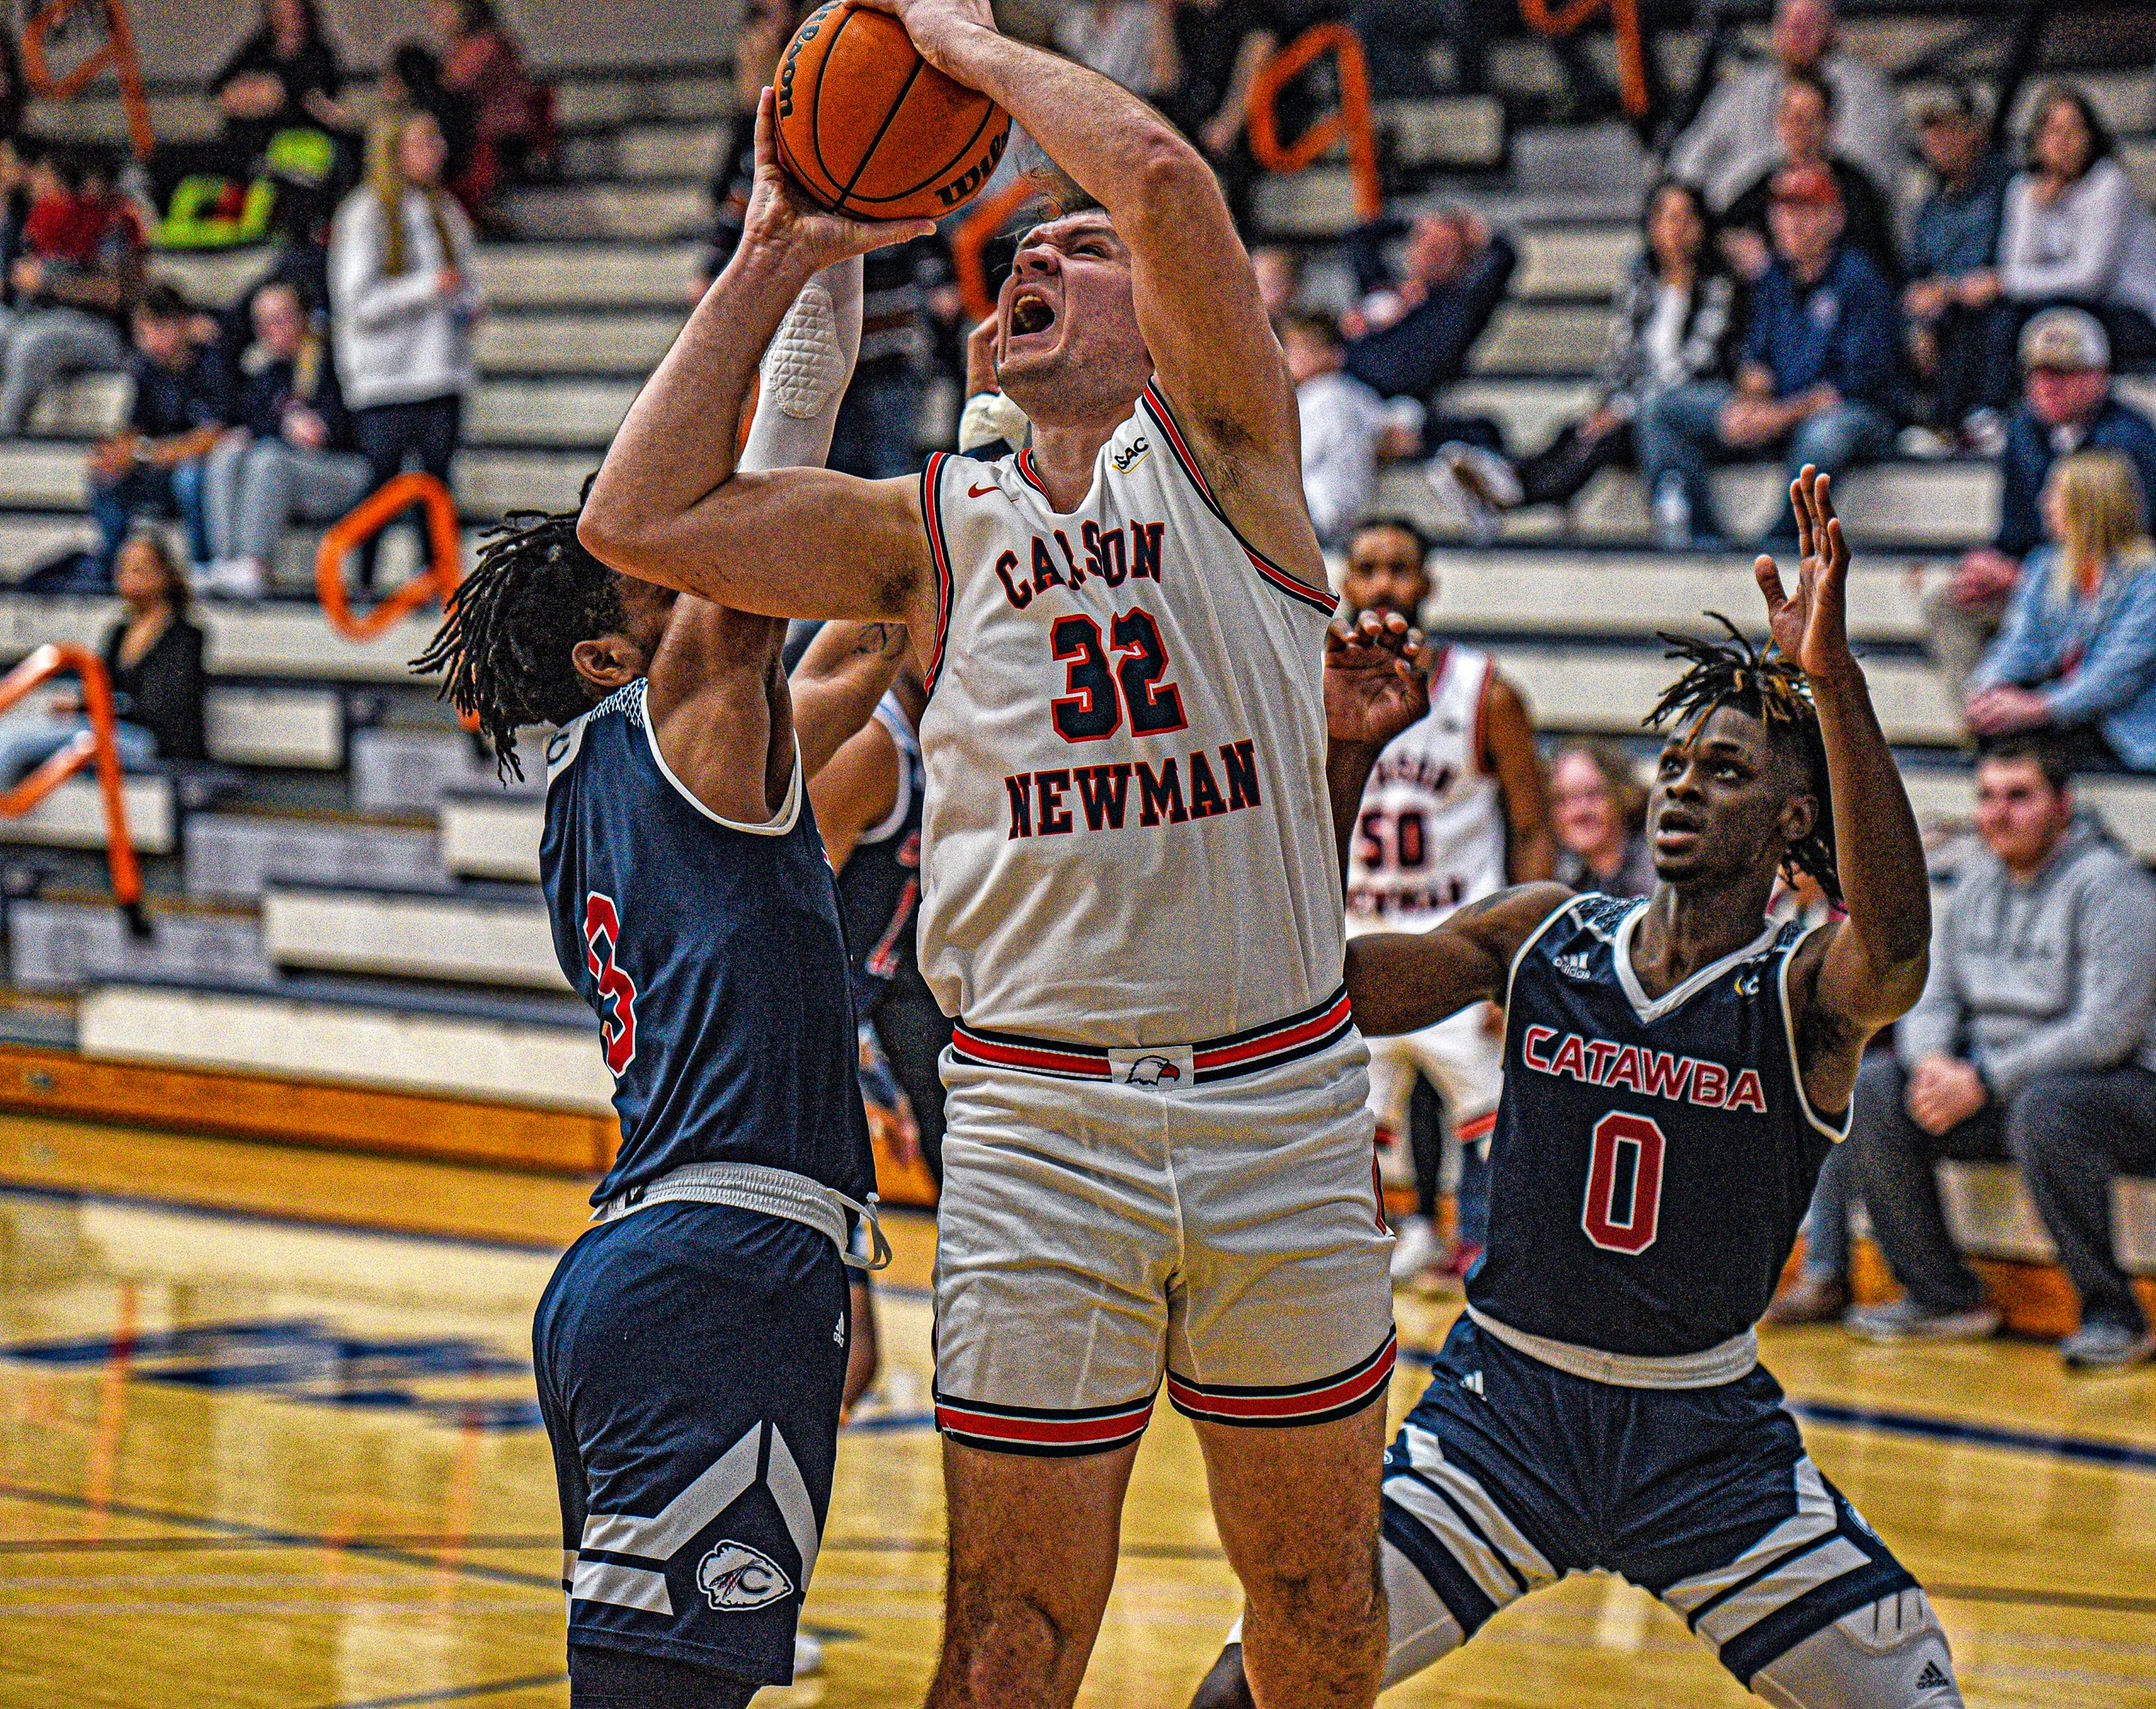 C-N snaps skid, staves off late Catawba rally